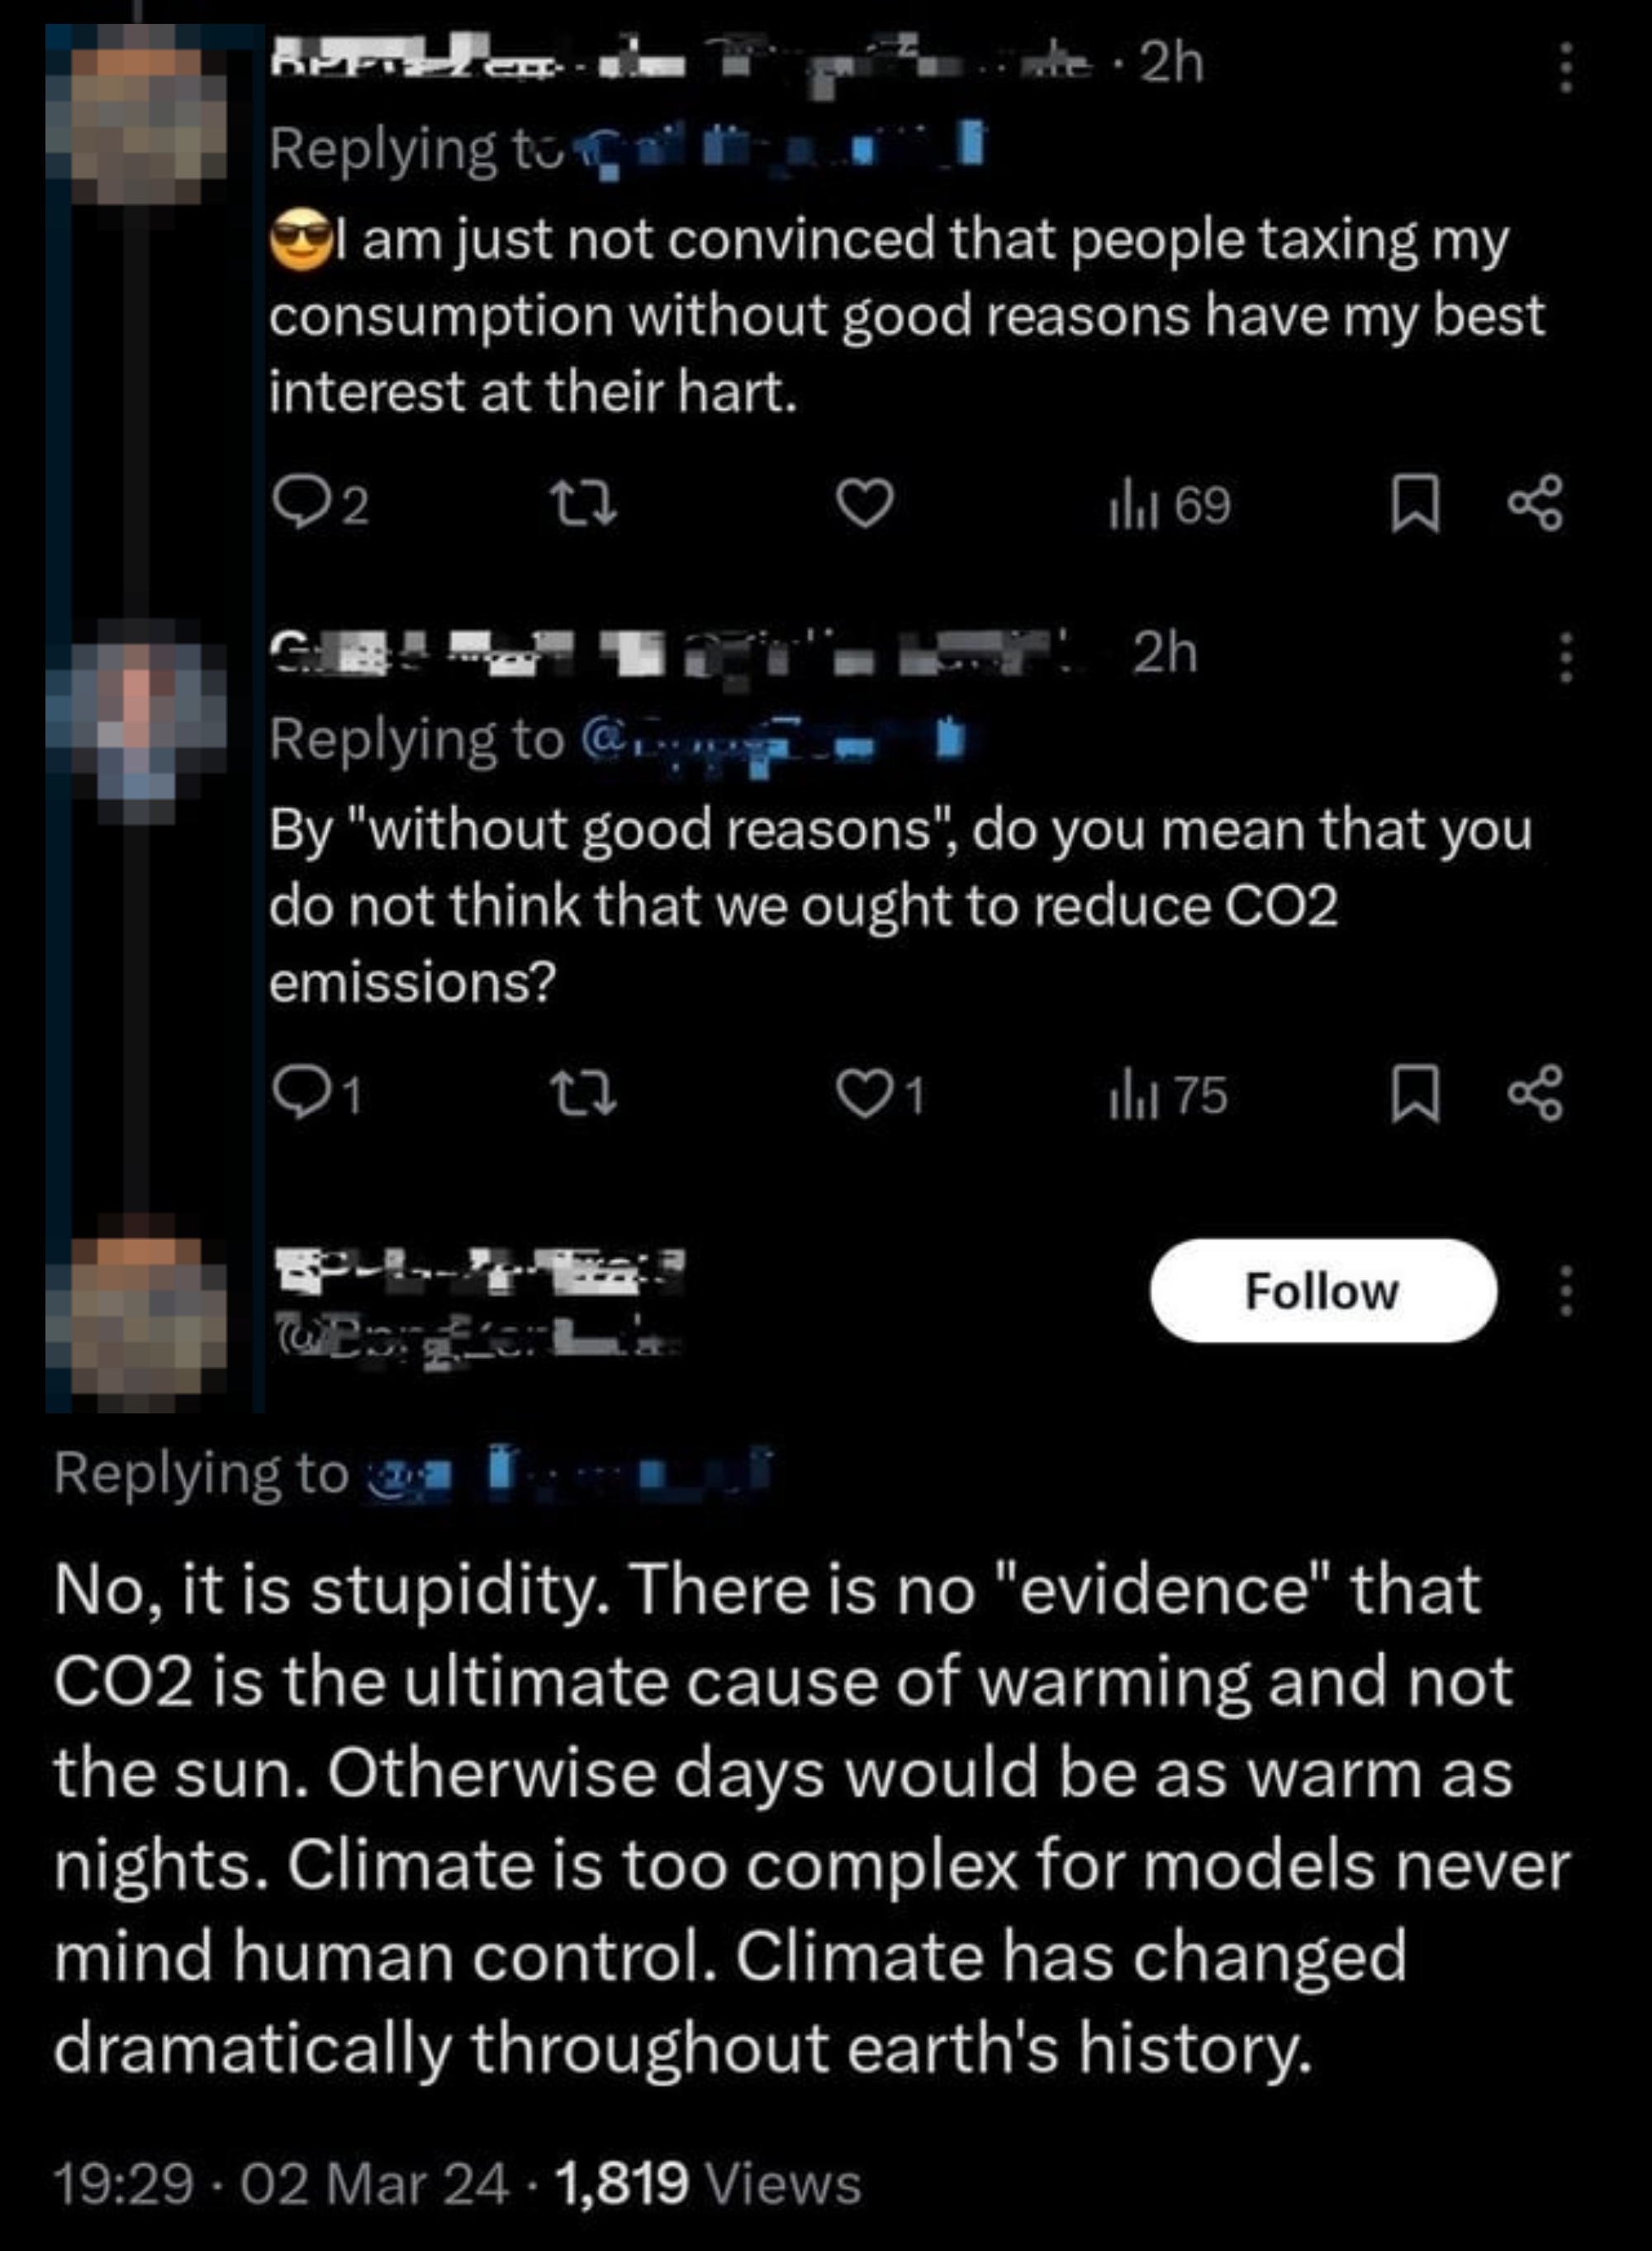 Commenter arguing there&#x27;s no evidence CO2 is the ultimate cause of global warming, otherwise days would be as warm as nights